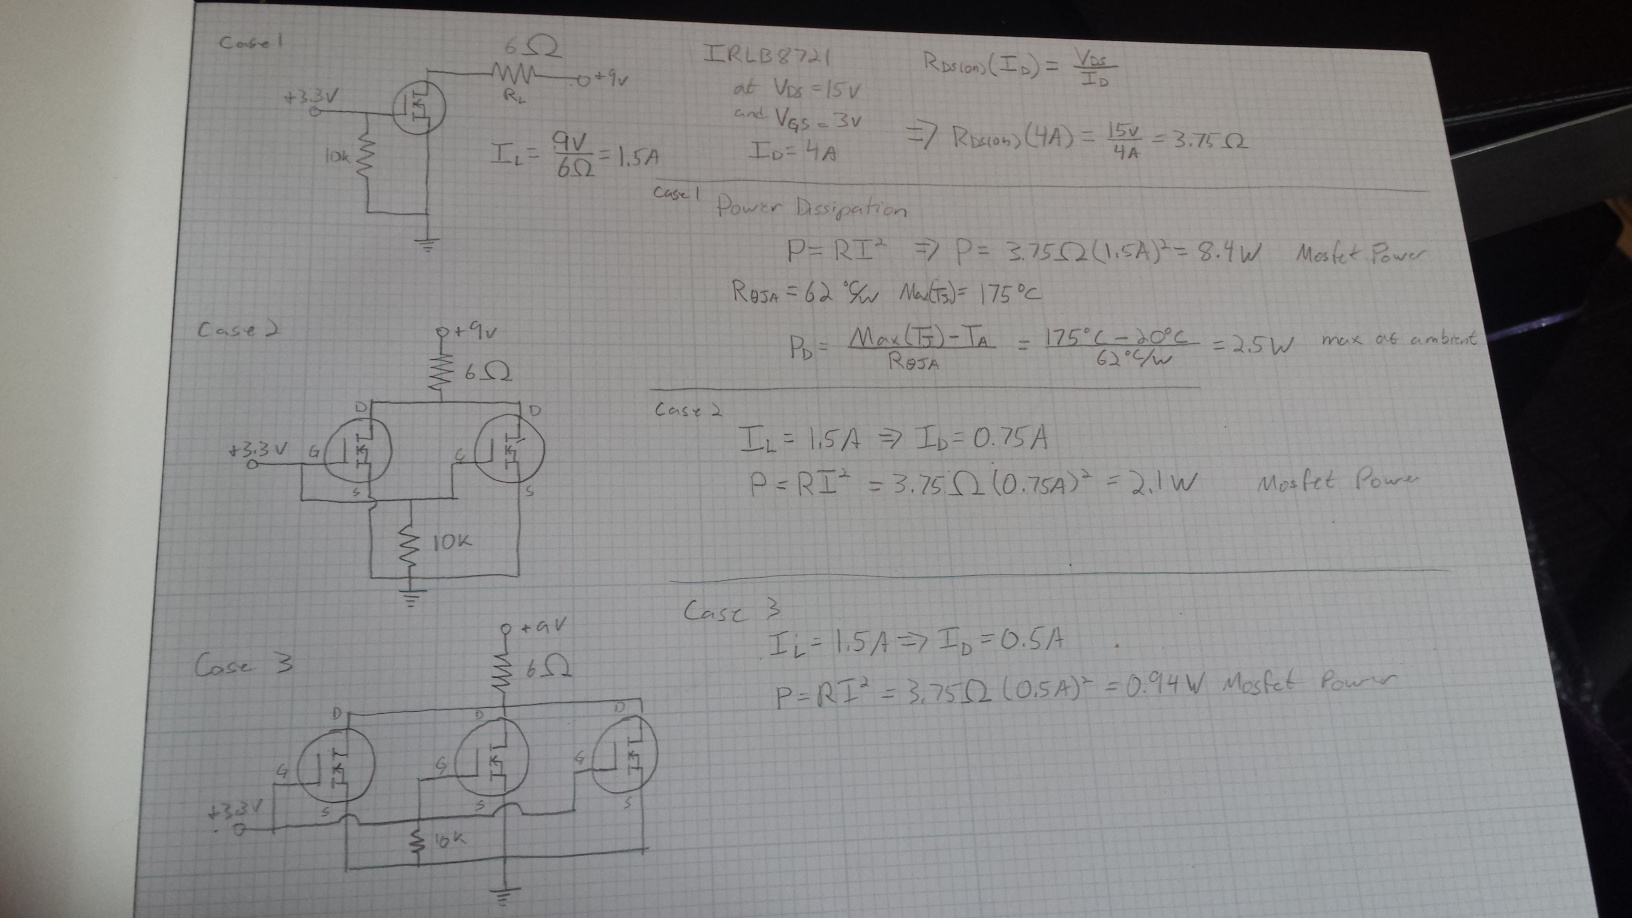 Hand drawn schematics and equations (likely incorrect) on graph paper.